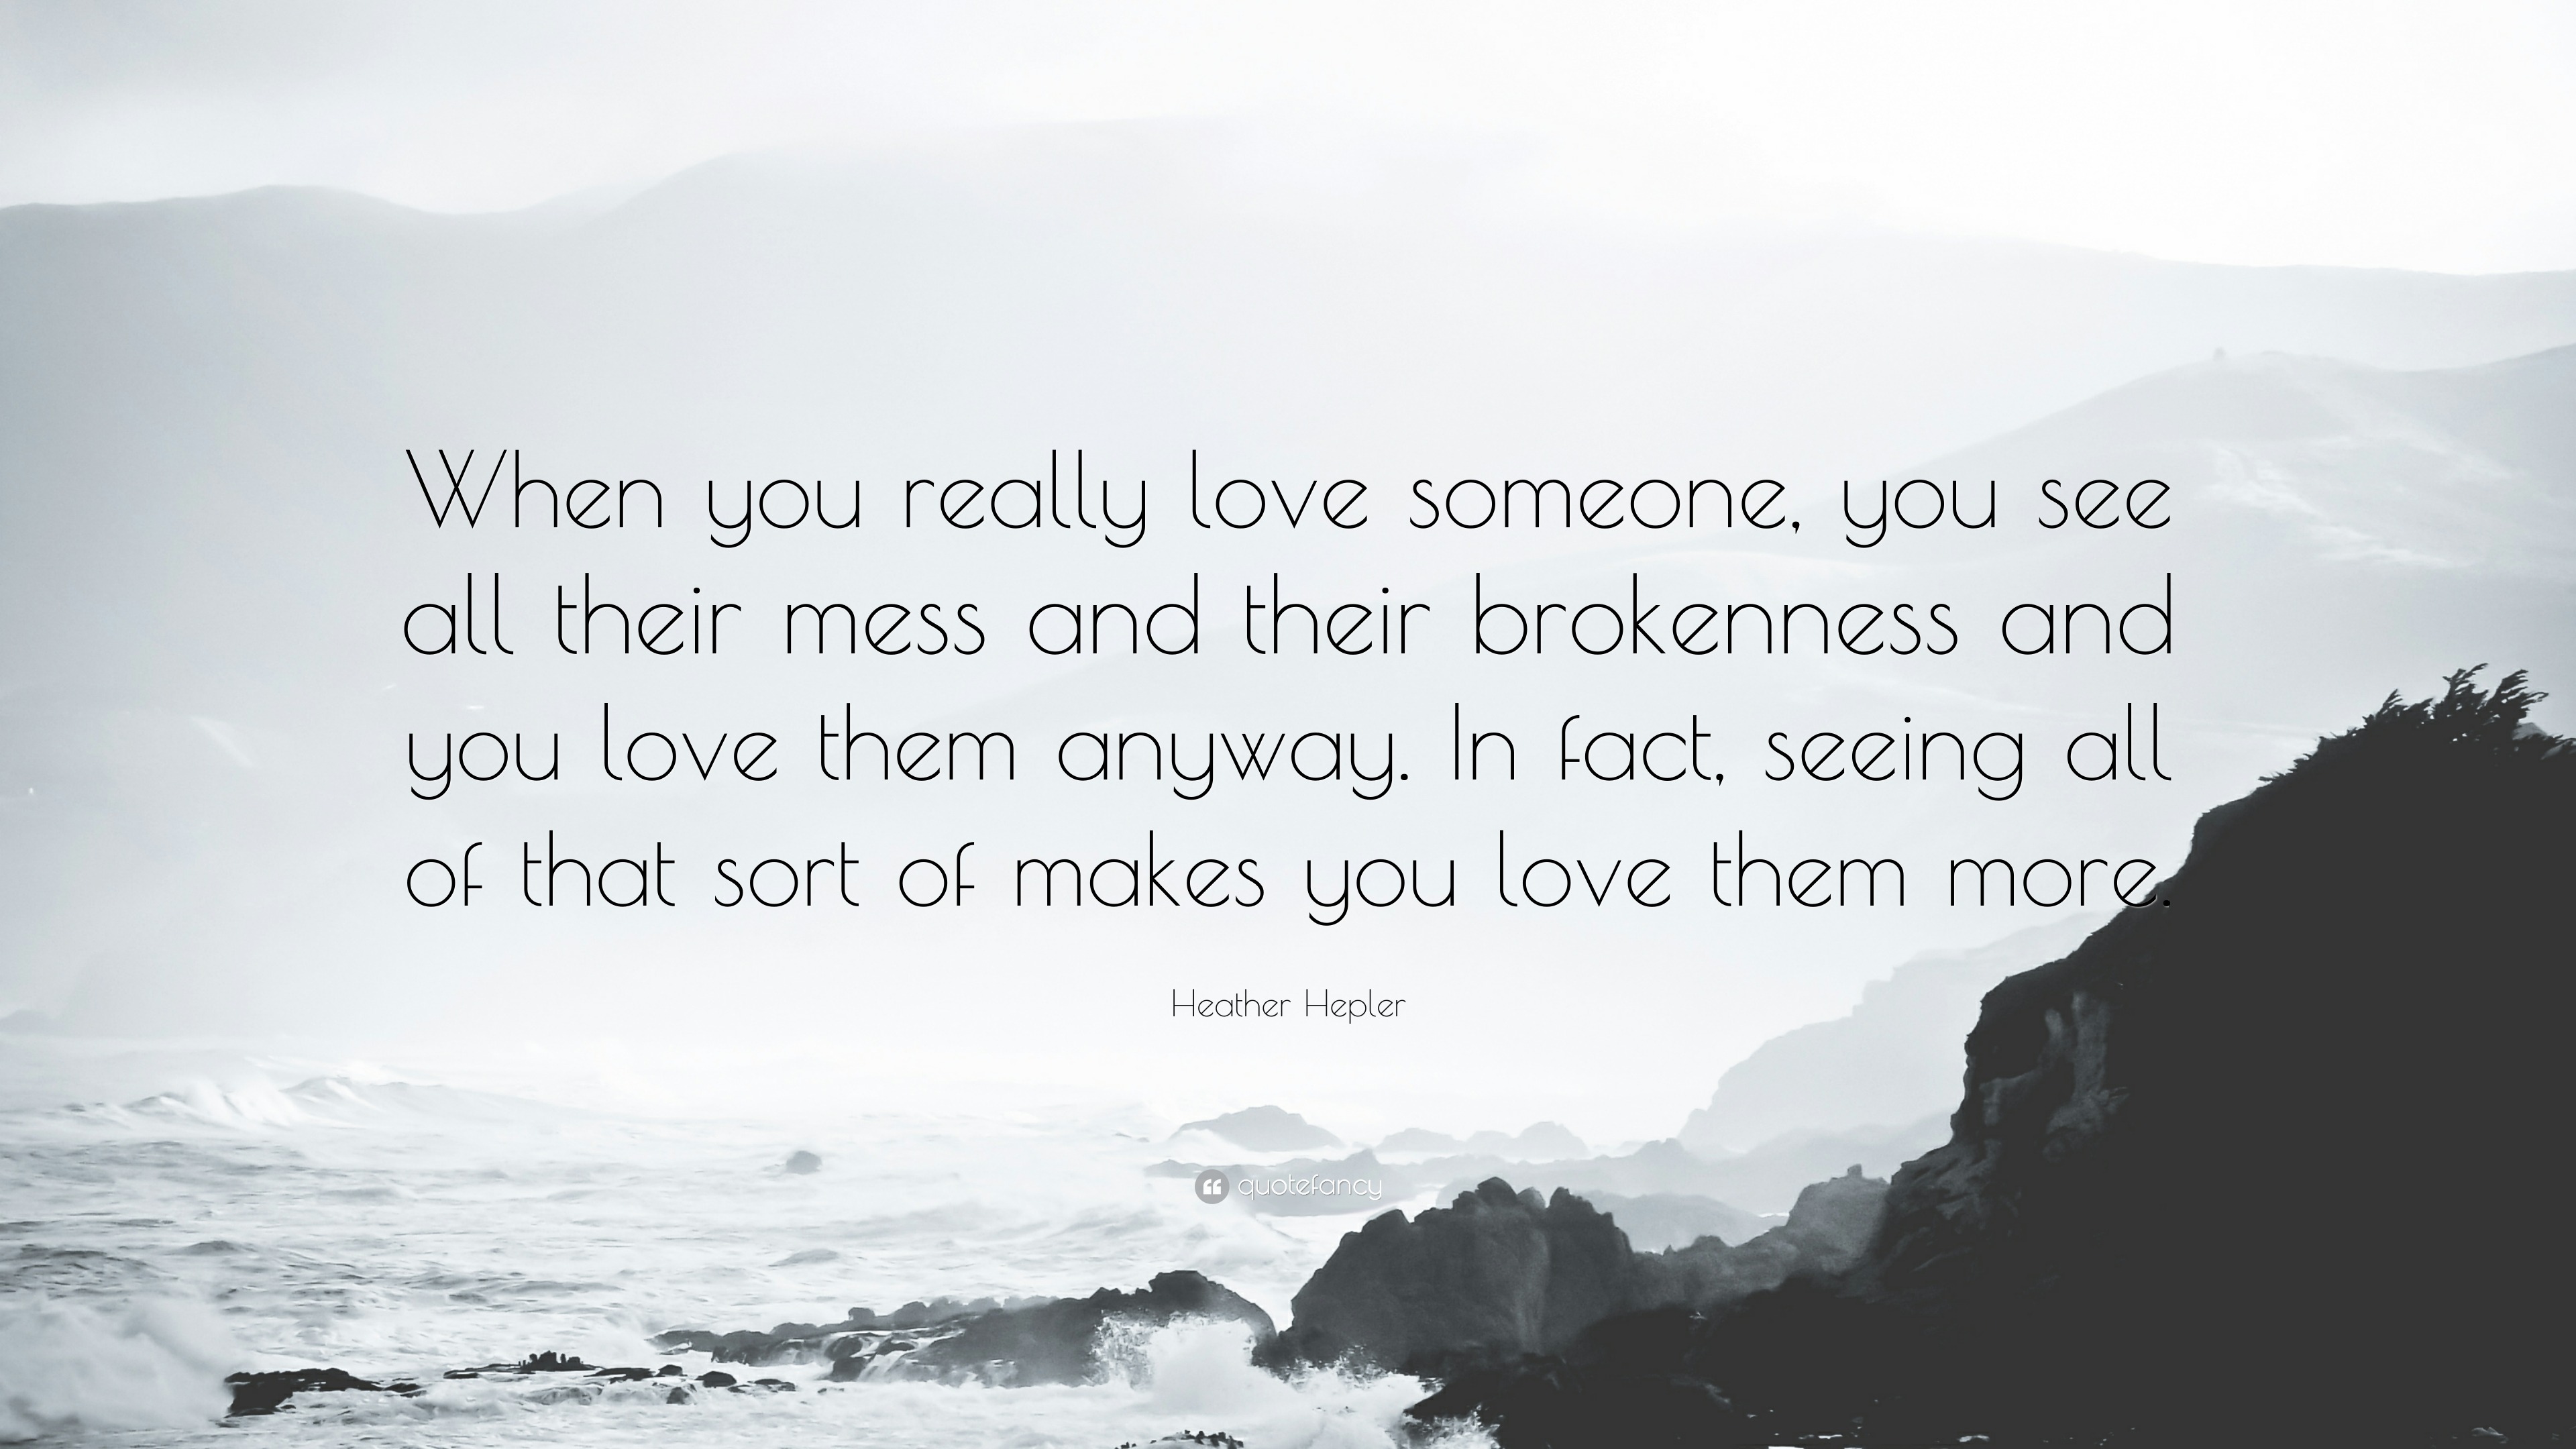 Heather Hepler Quote “When you really love someone you see all their mess